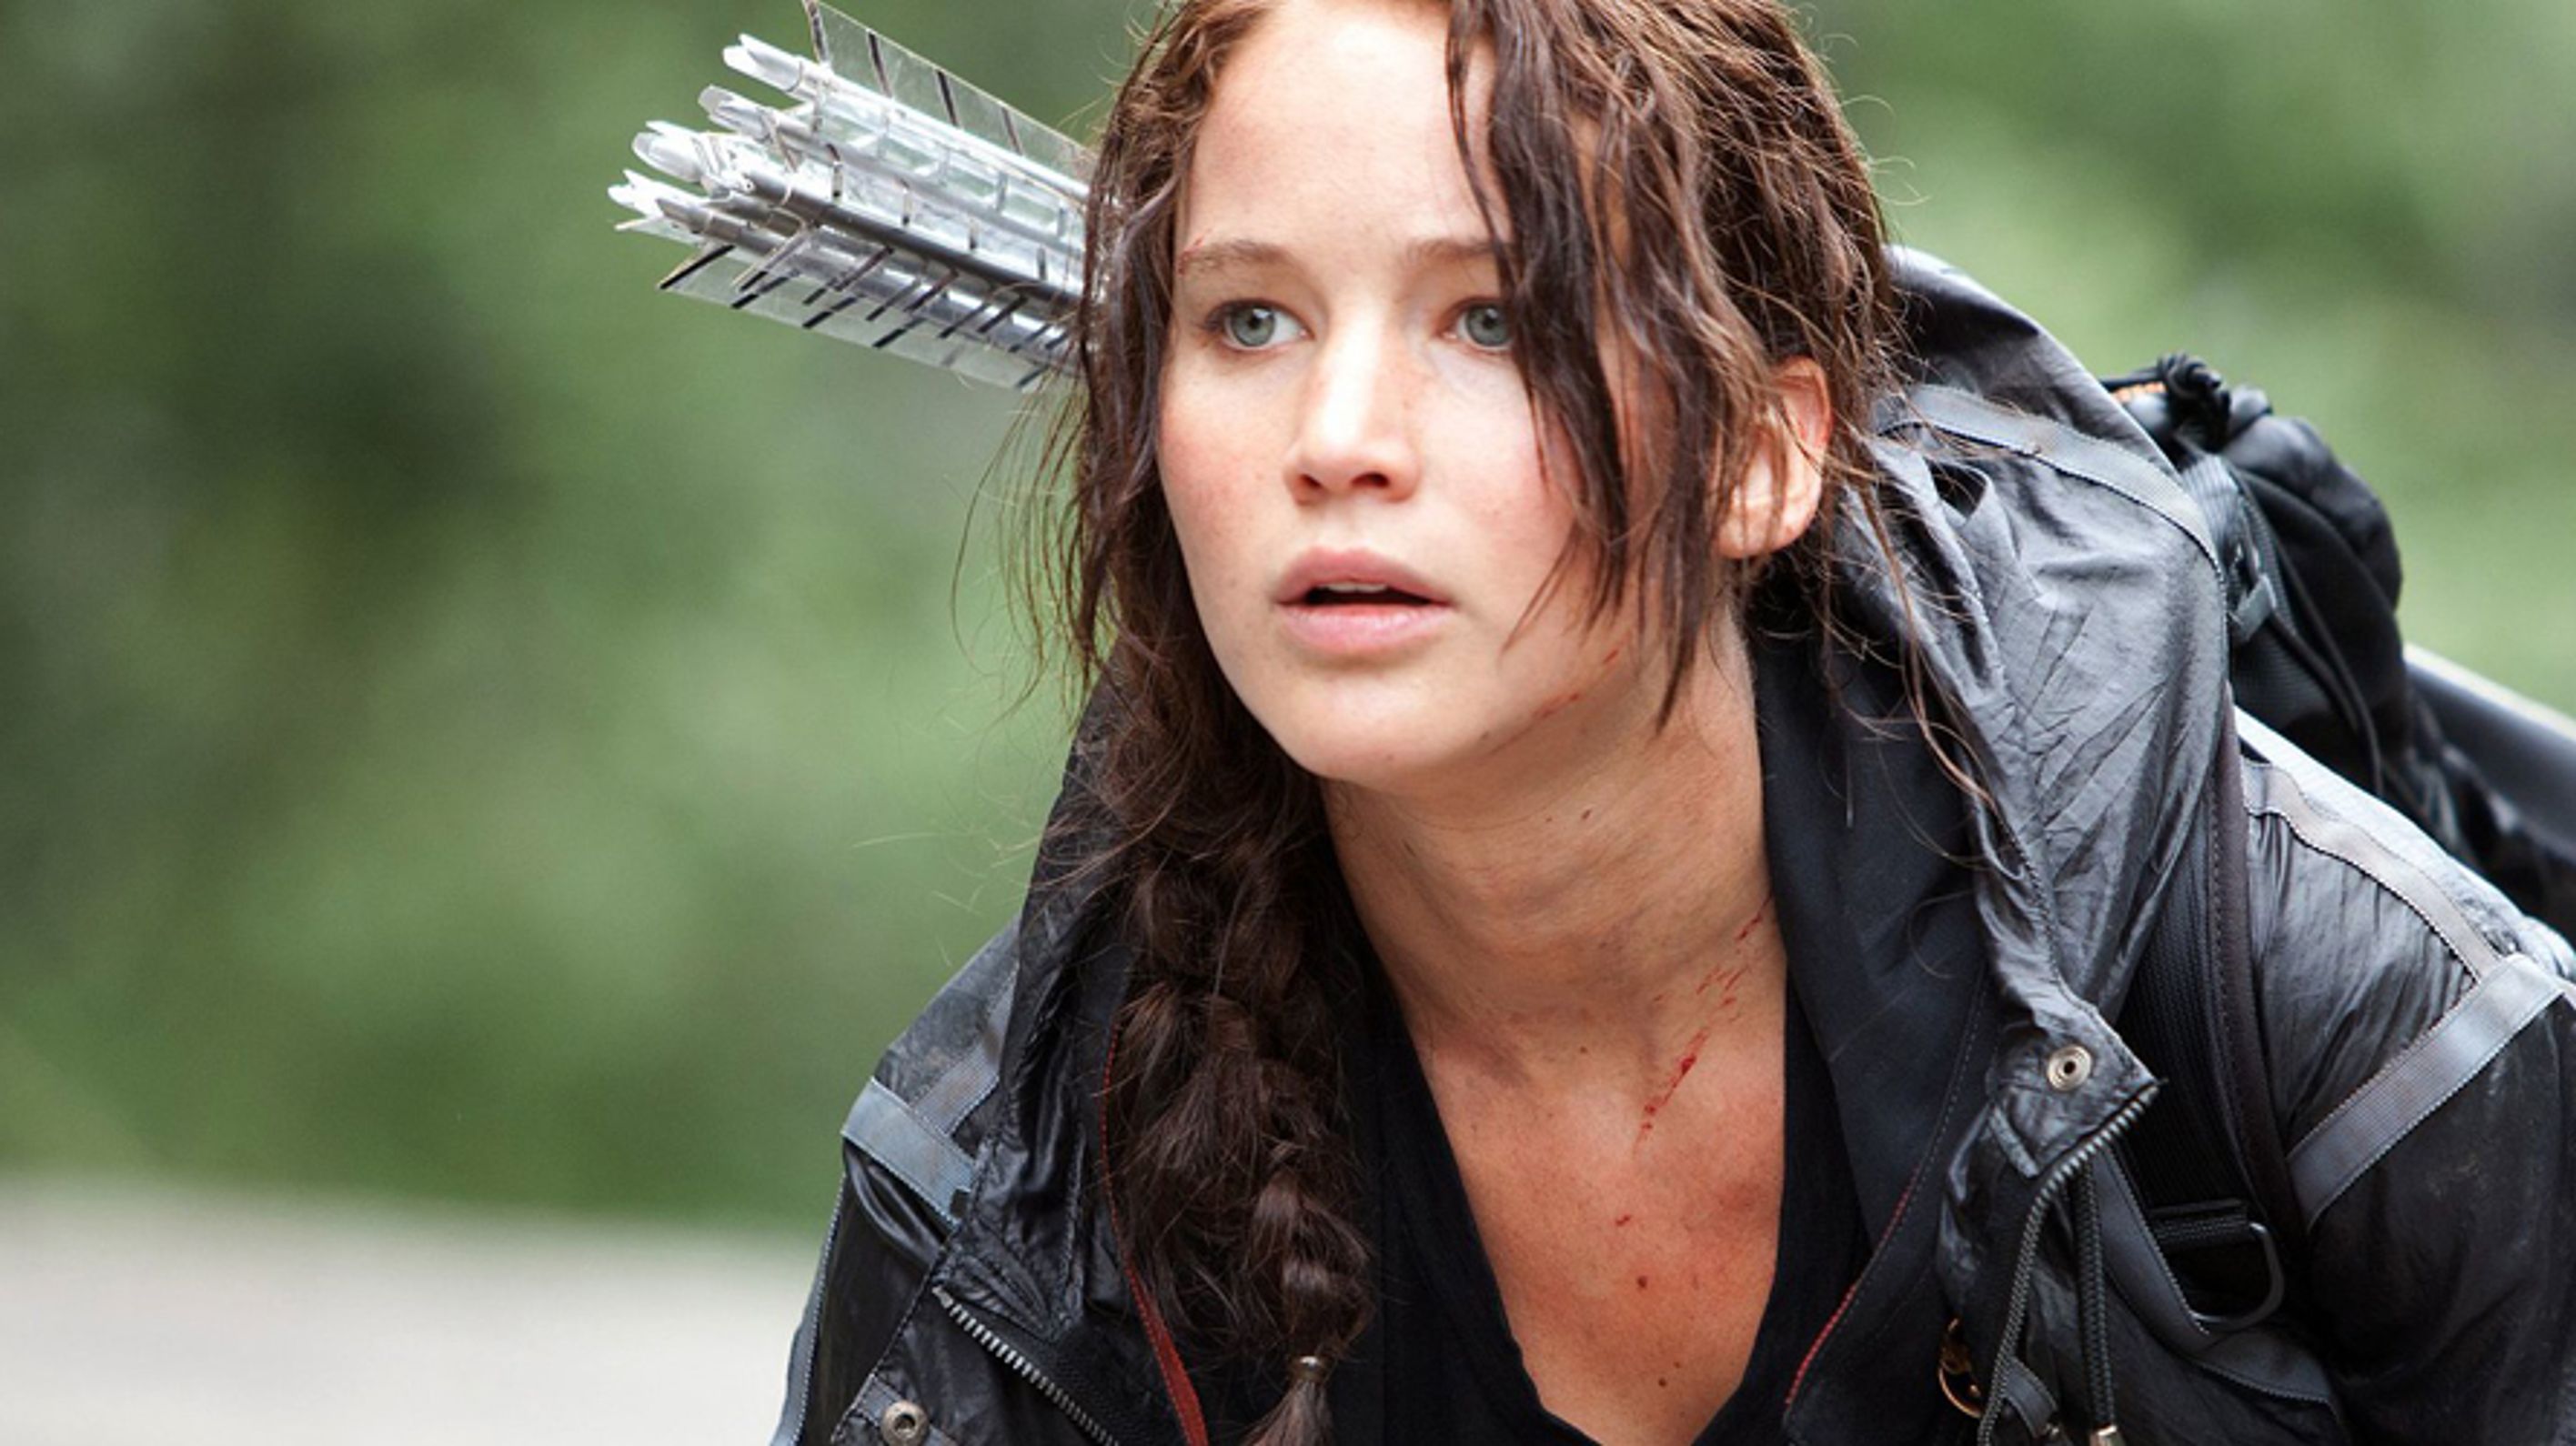 It Looks Like Theres Going To Be A Hunger Games Prequels